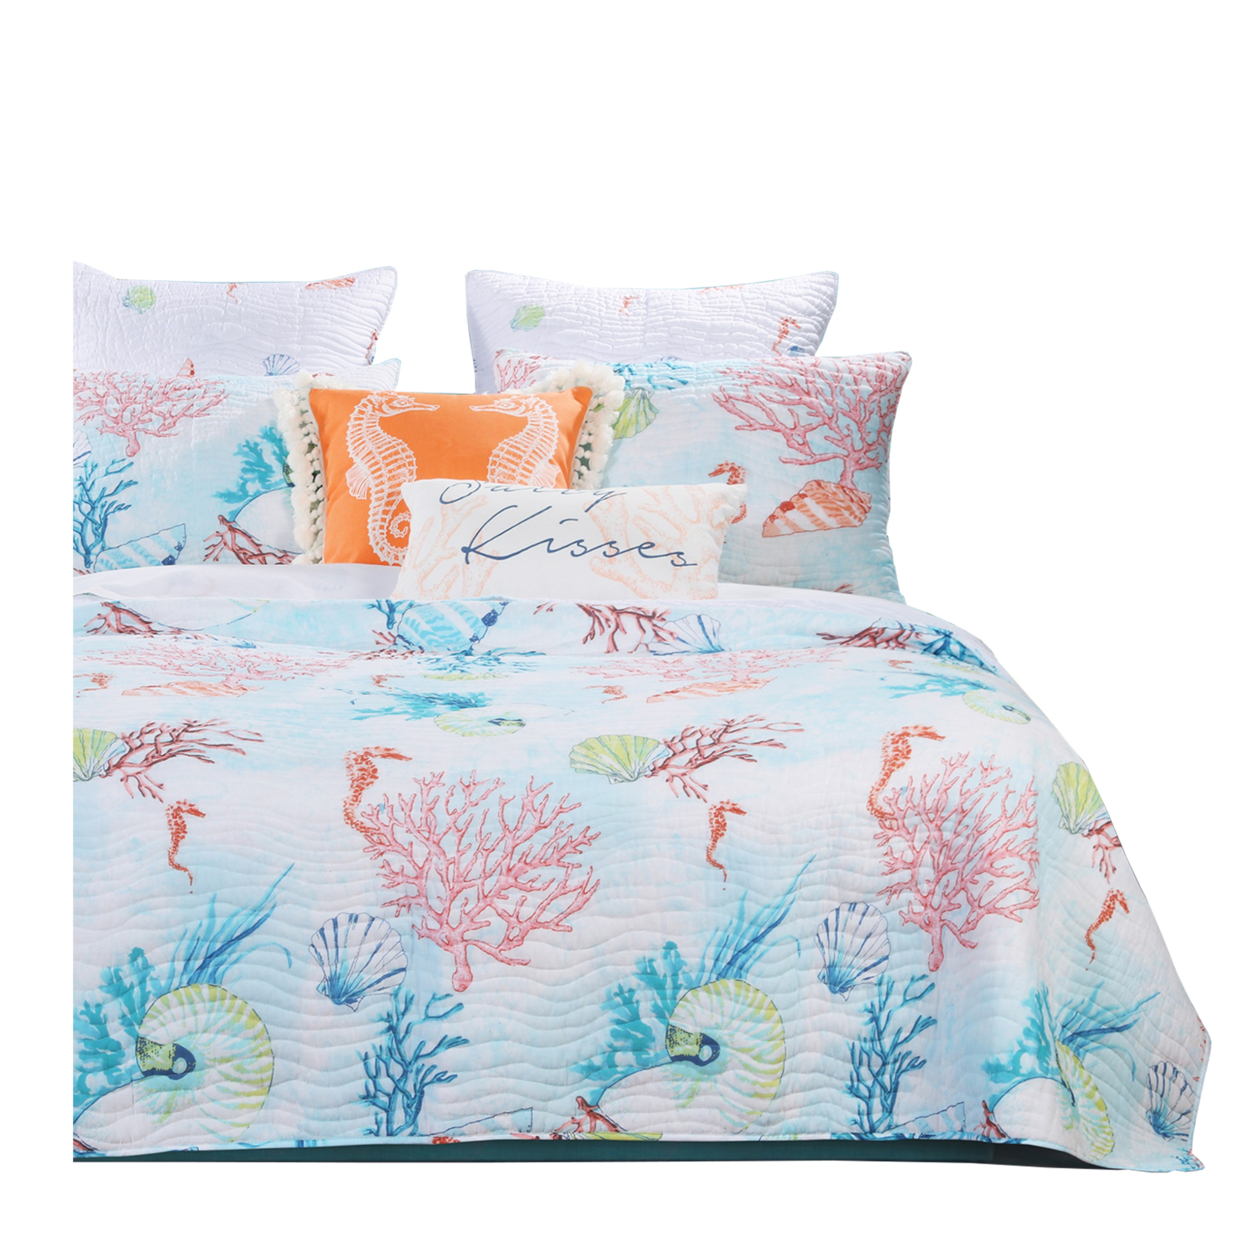 Twin Size 2 Piece Polyester Quilt Set With Coral Prints, Multicolor- Saltoro Sherpi